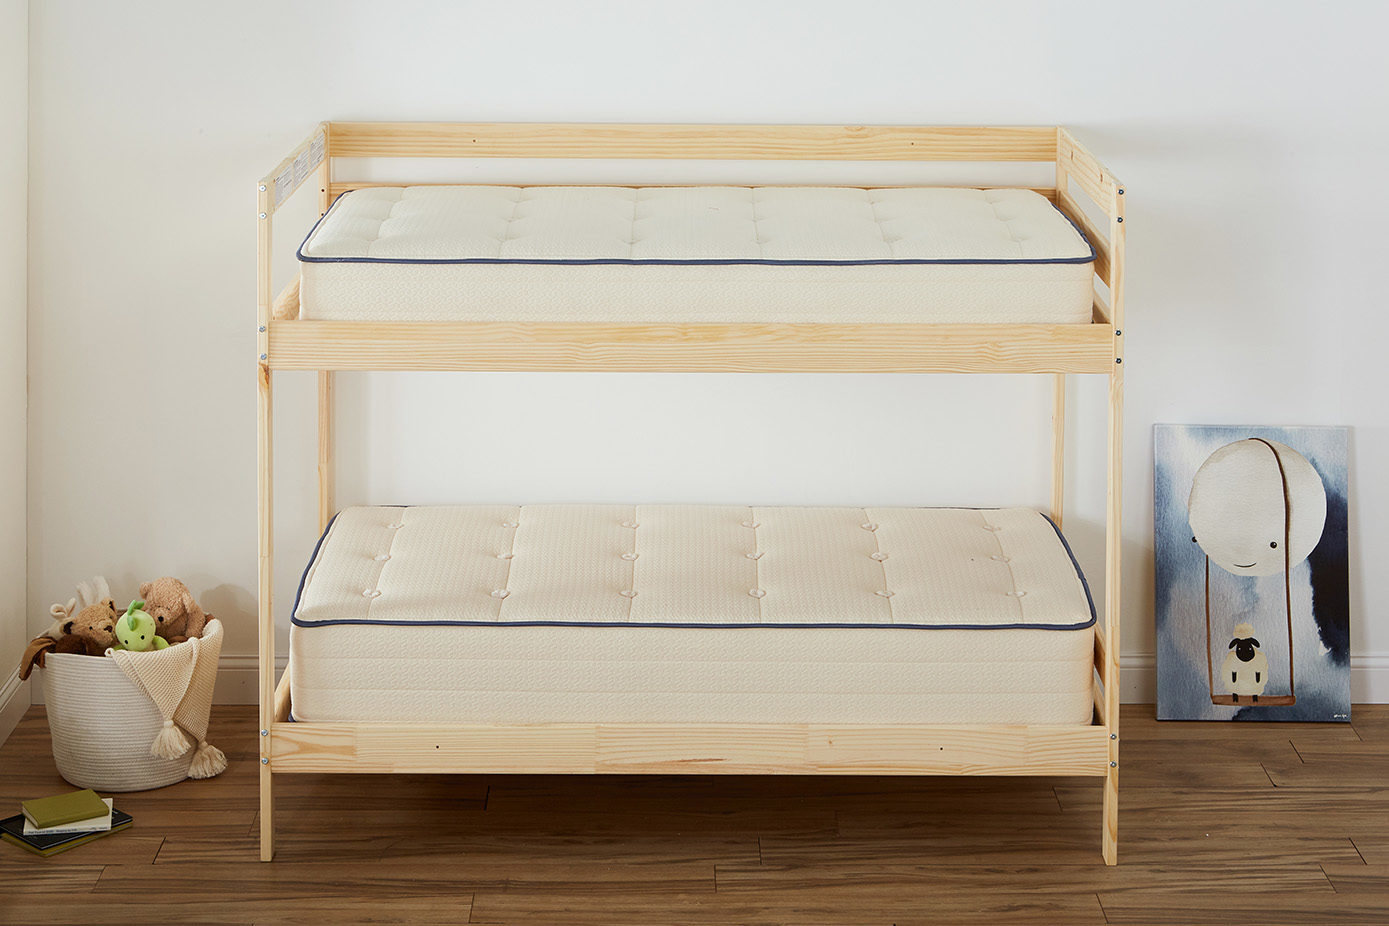 Kiwi Bunk Bed Mattresses, Full Over Full Bunk Beds With Mattresses Included